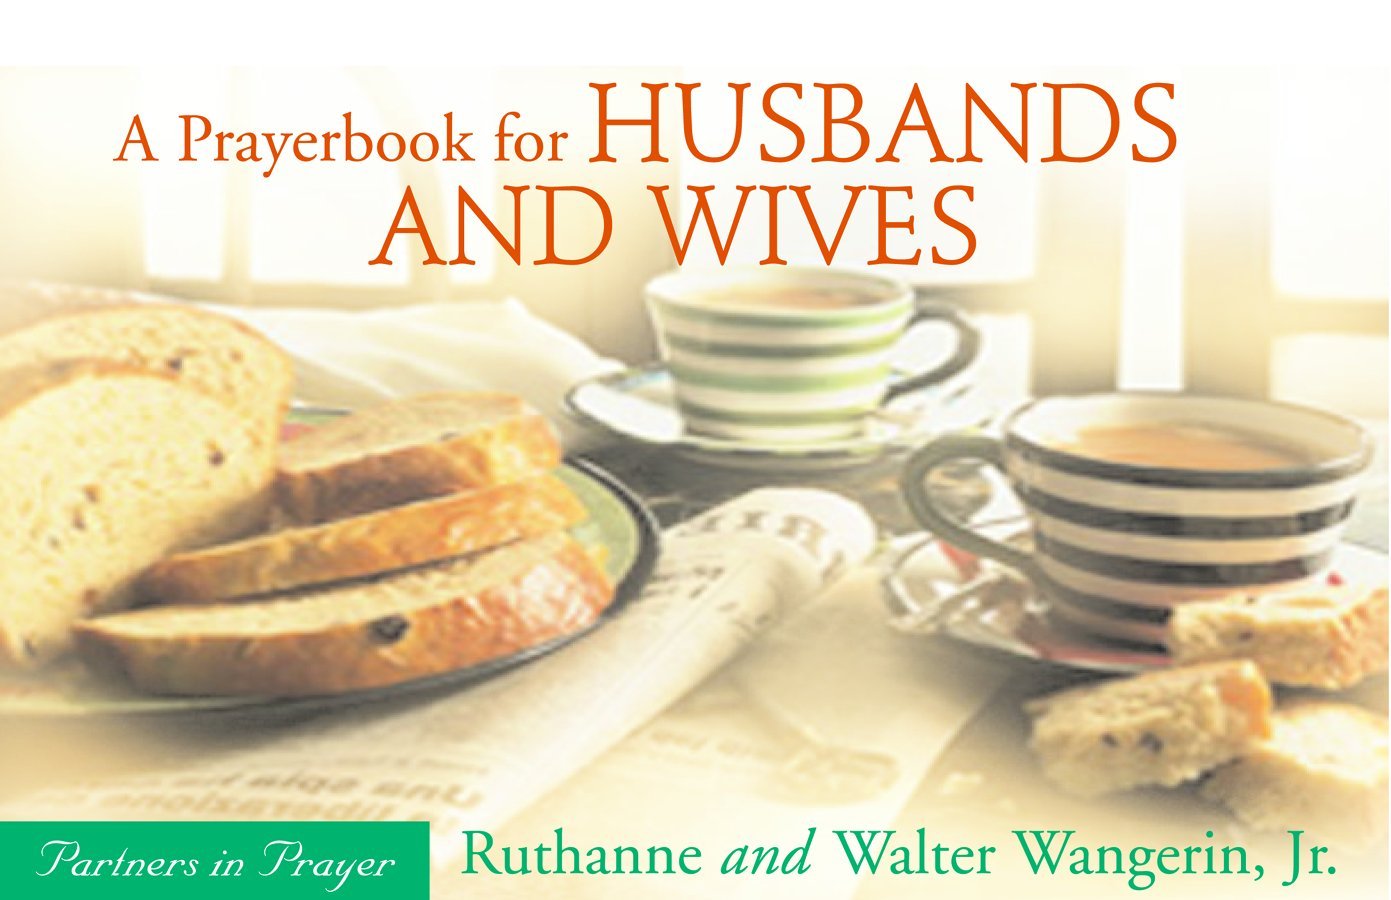 A Prayerbook for Husbands and Wives: Partners in Prayer